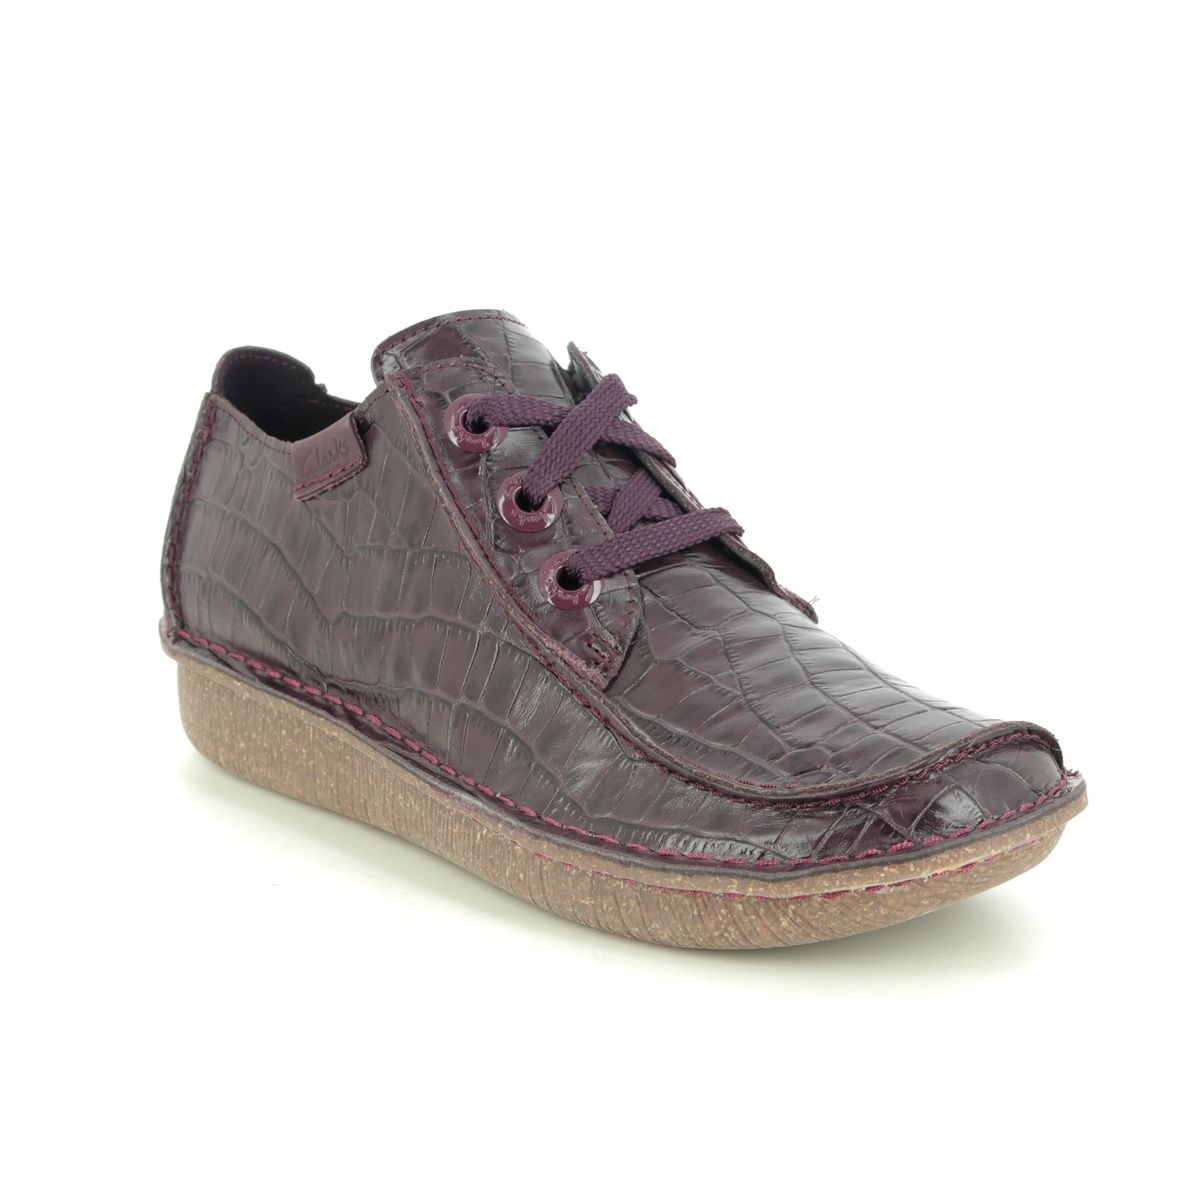 clarks ladies shoes funny dream